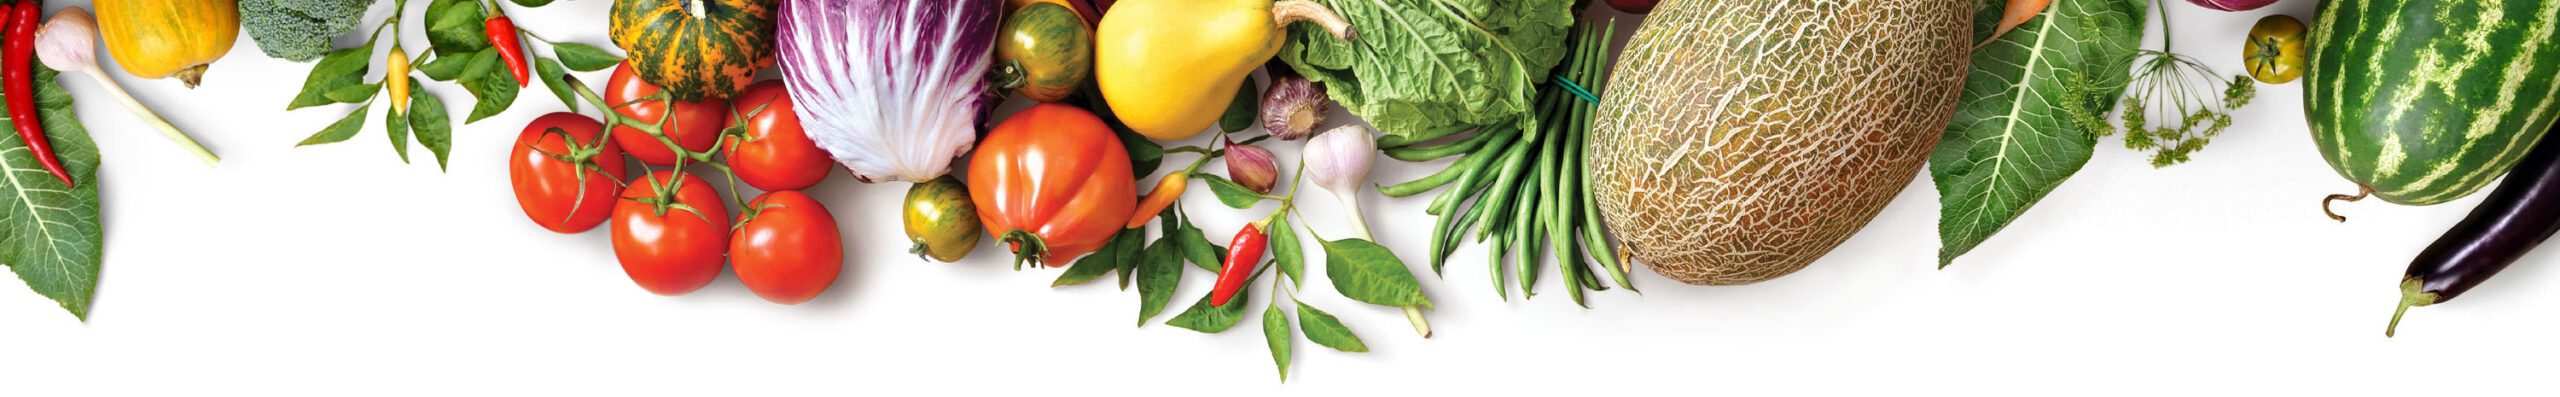 produce_banner_3000px_crop-scaled.jpg